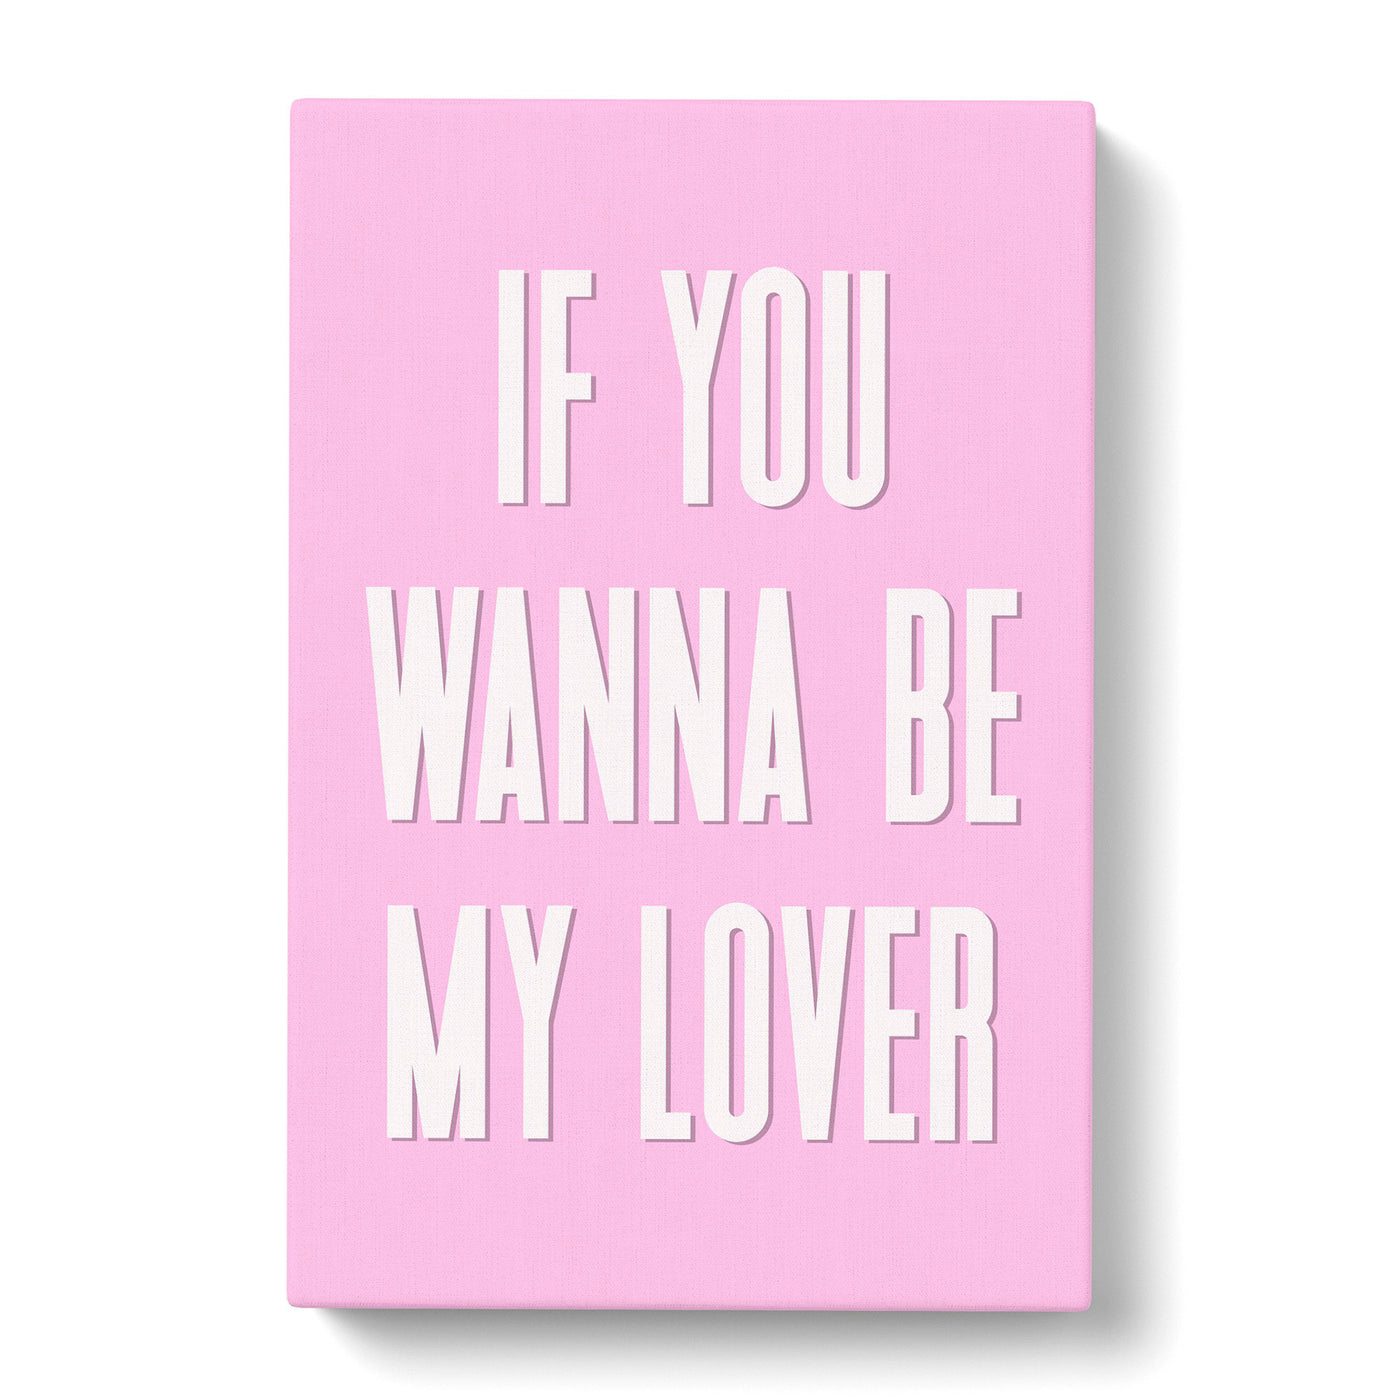 My Lover Typography Canvas Print Main Image